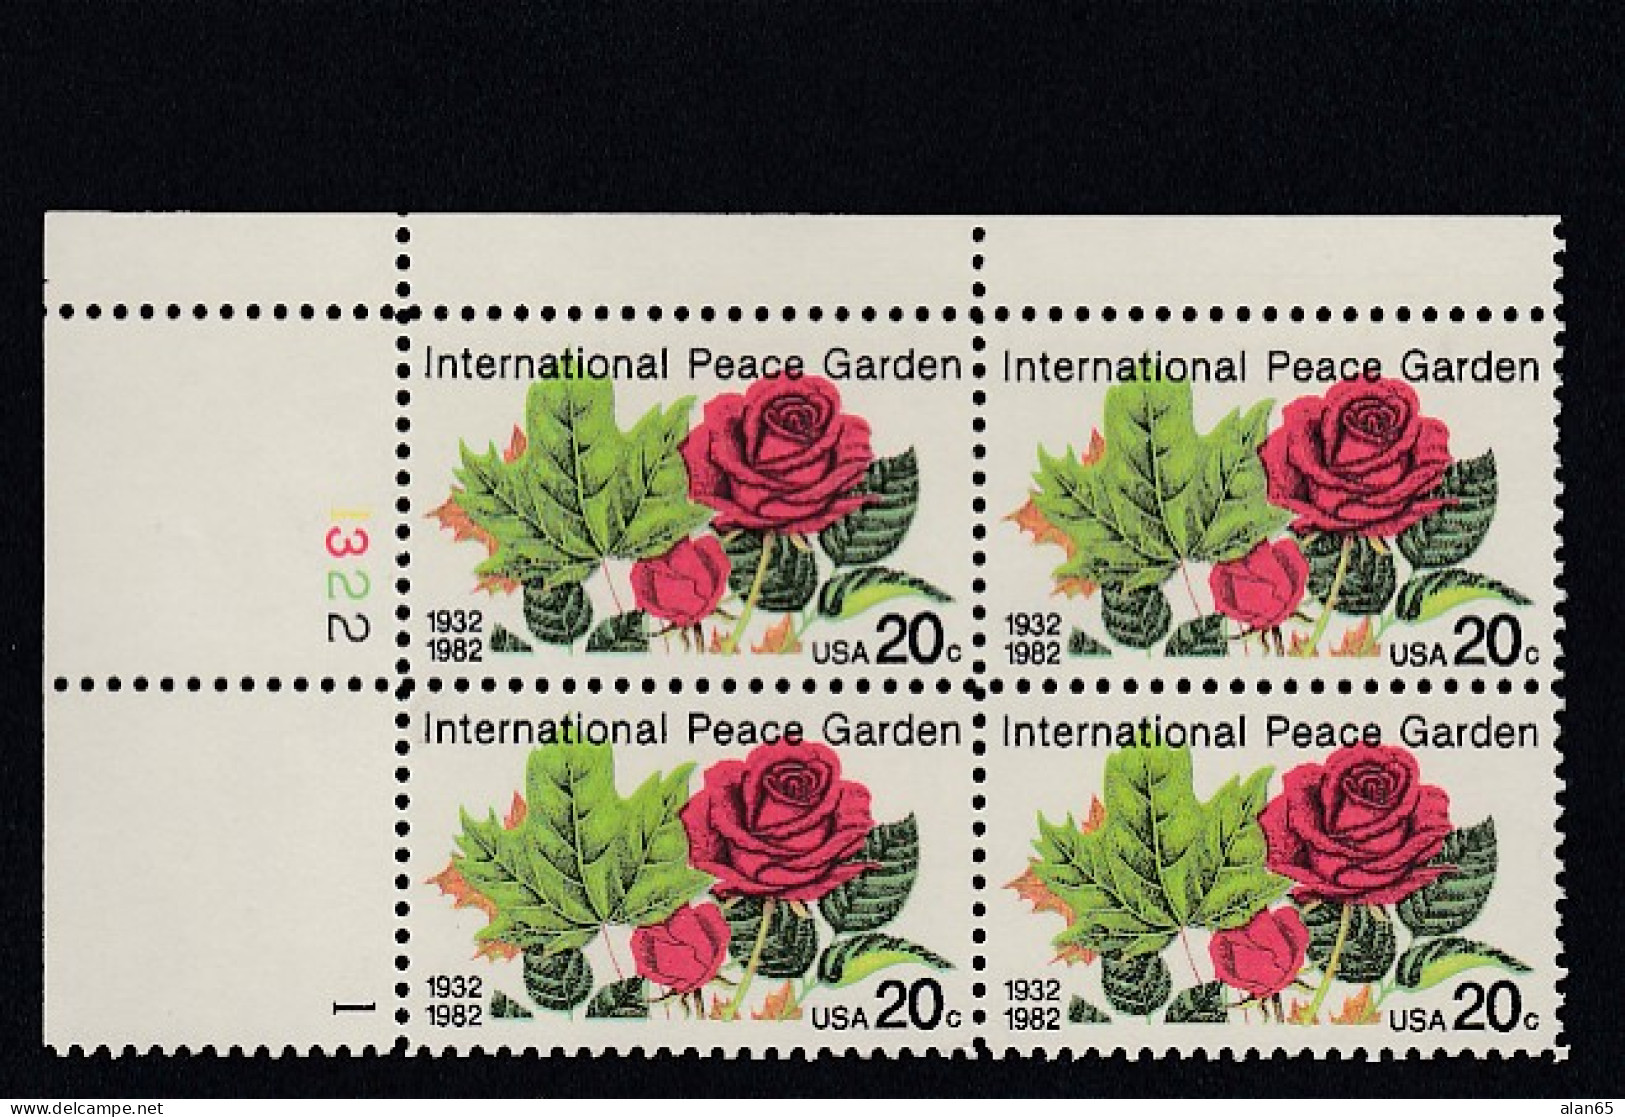 Sc#2014, Plate # Block Of 4 20-cent, International Peace Garden, Flowers Rose, US Postage Stamps - Numero Di Lastre